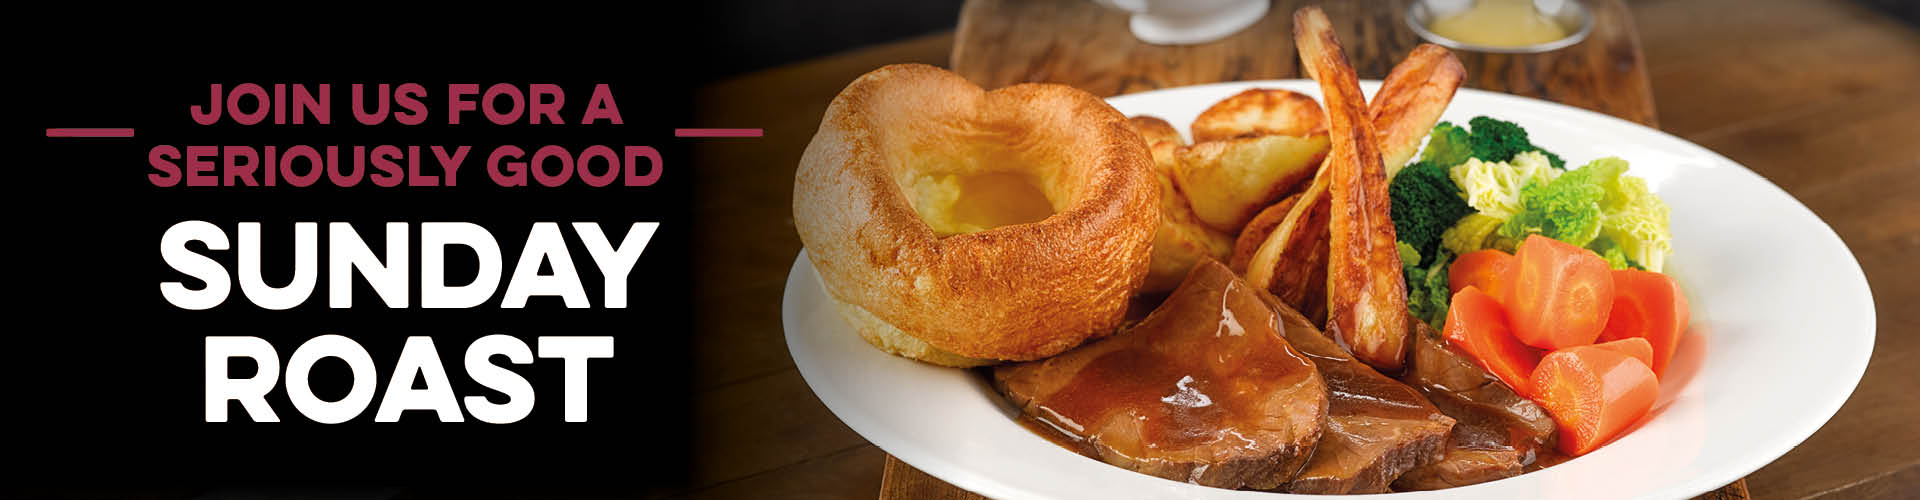 Enjoy a Sunday Roast at The Red Lion Hotel pub in Luton